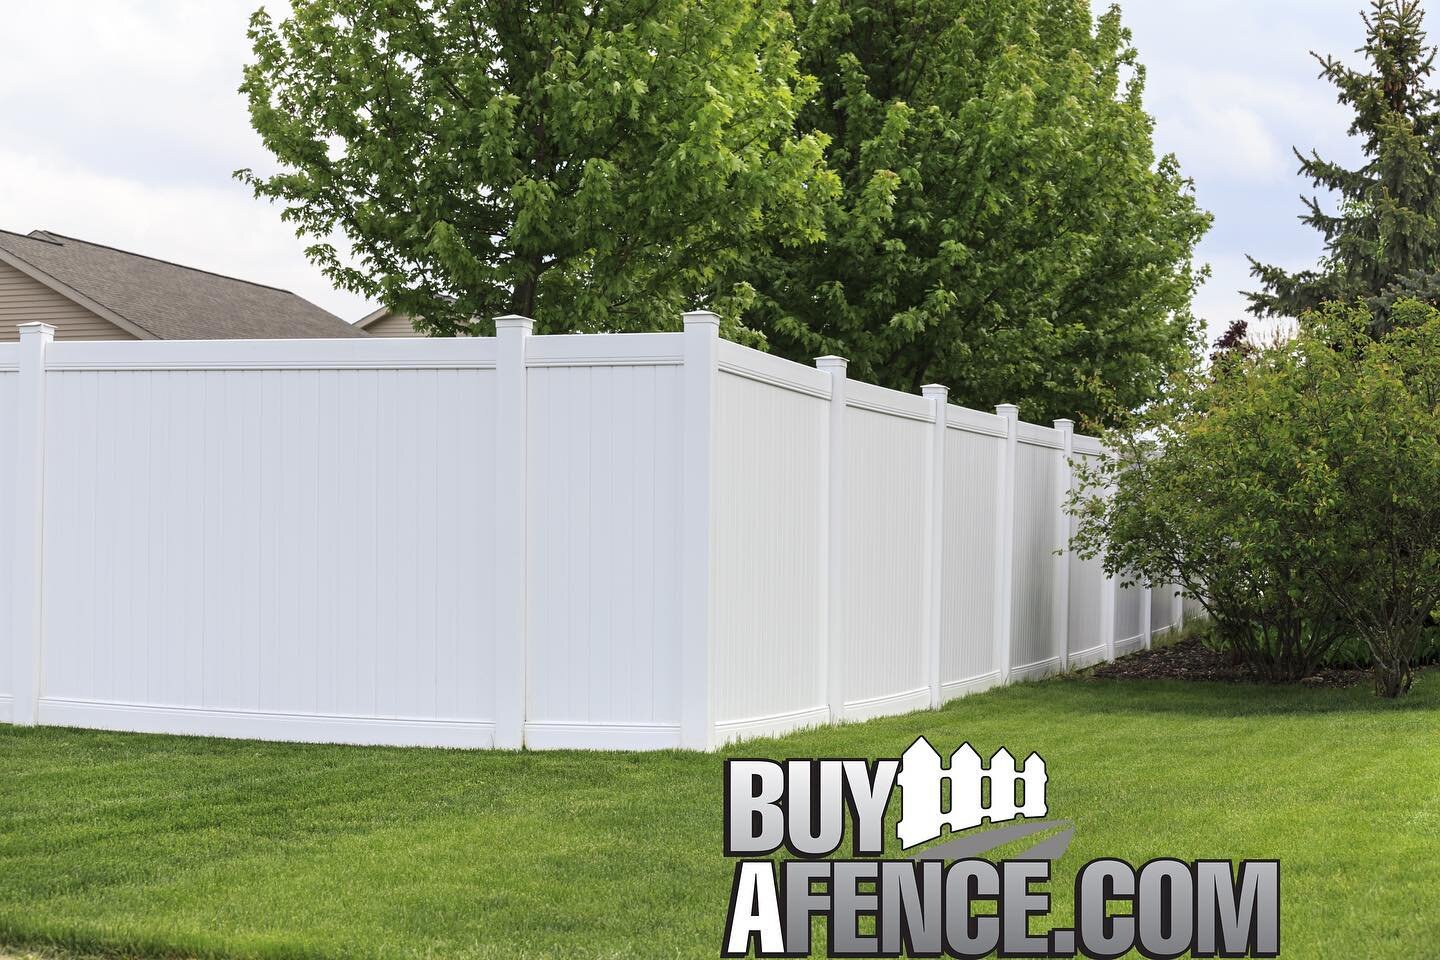 Get a #newfence today!
-
We specialize in:
✅ #cedarfence
✅ #vinylfence
✅ #chainlinkfence 
✅ #aluminumfence 
✅ #privacyfence 
-
Get your new fence installed in 30-45 days 😎